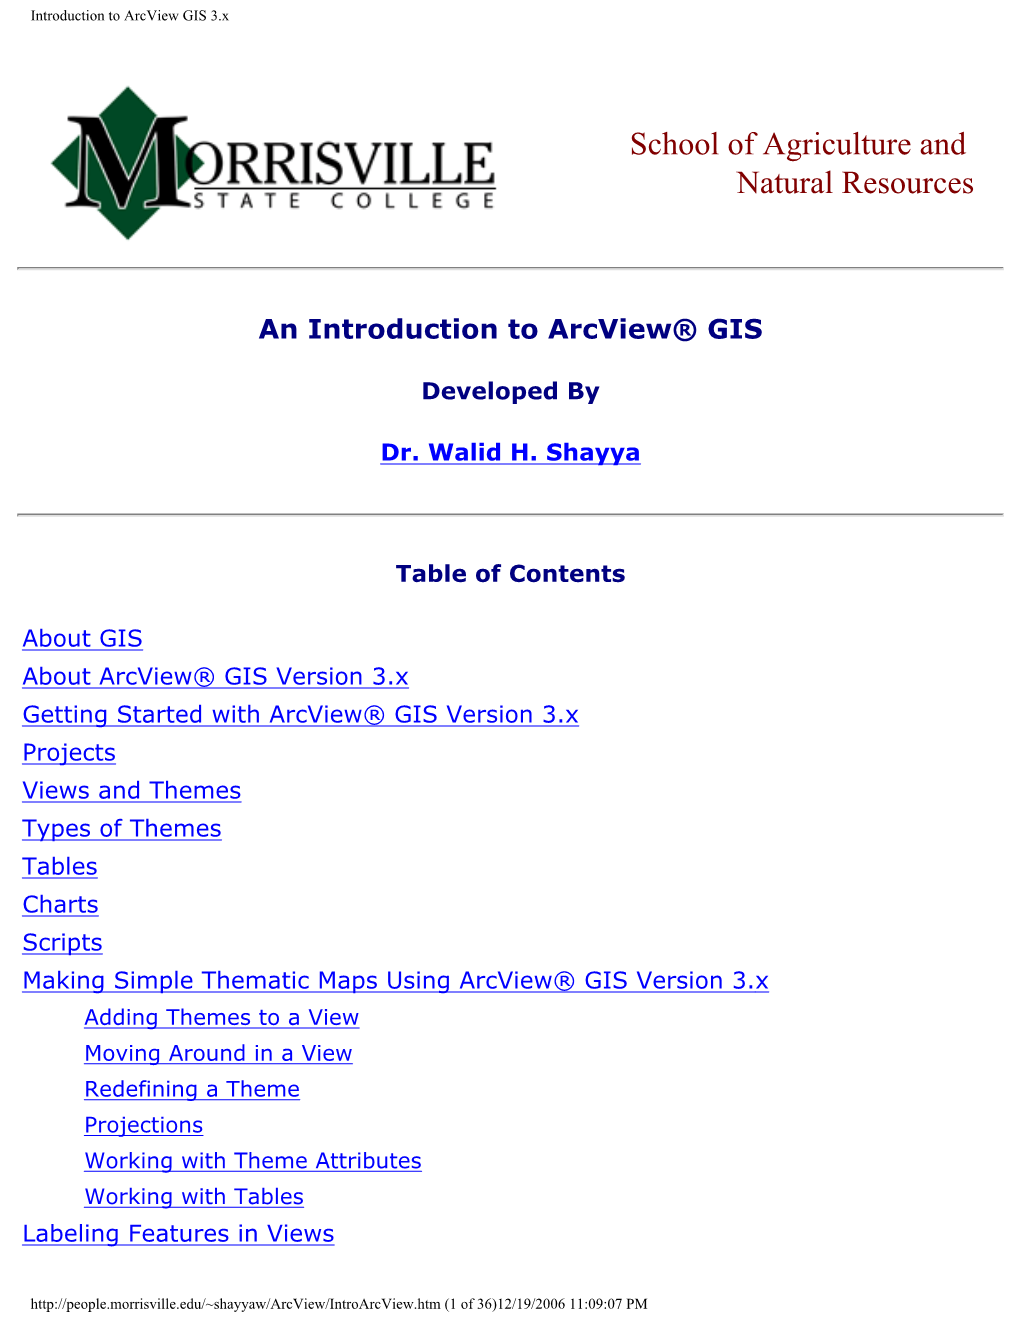 Introduction to Arcview GIS 3.X